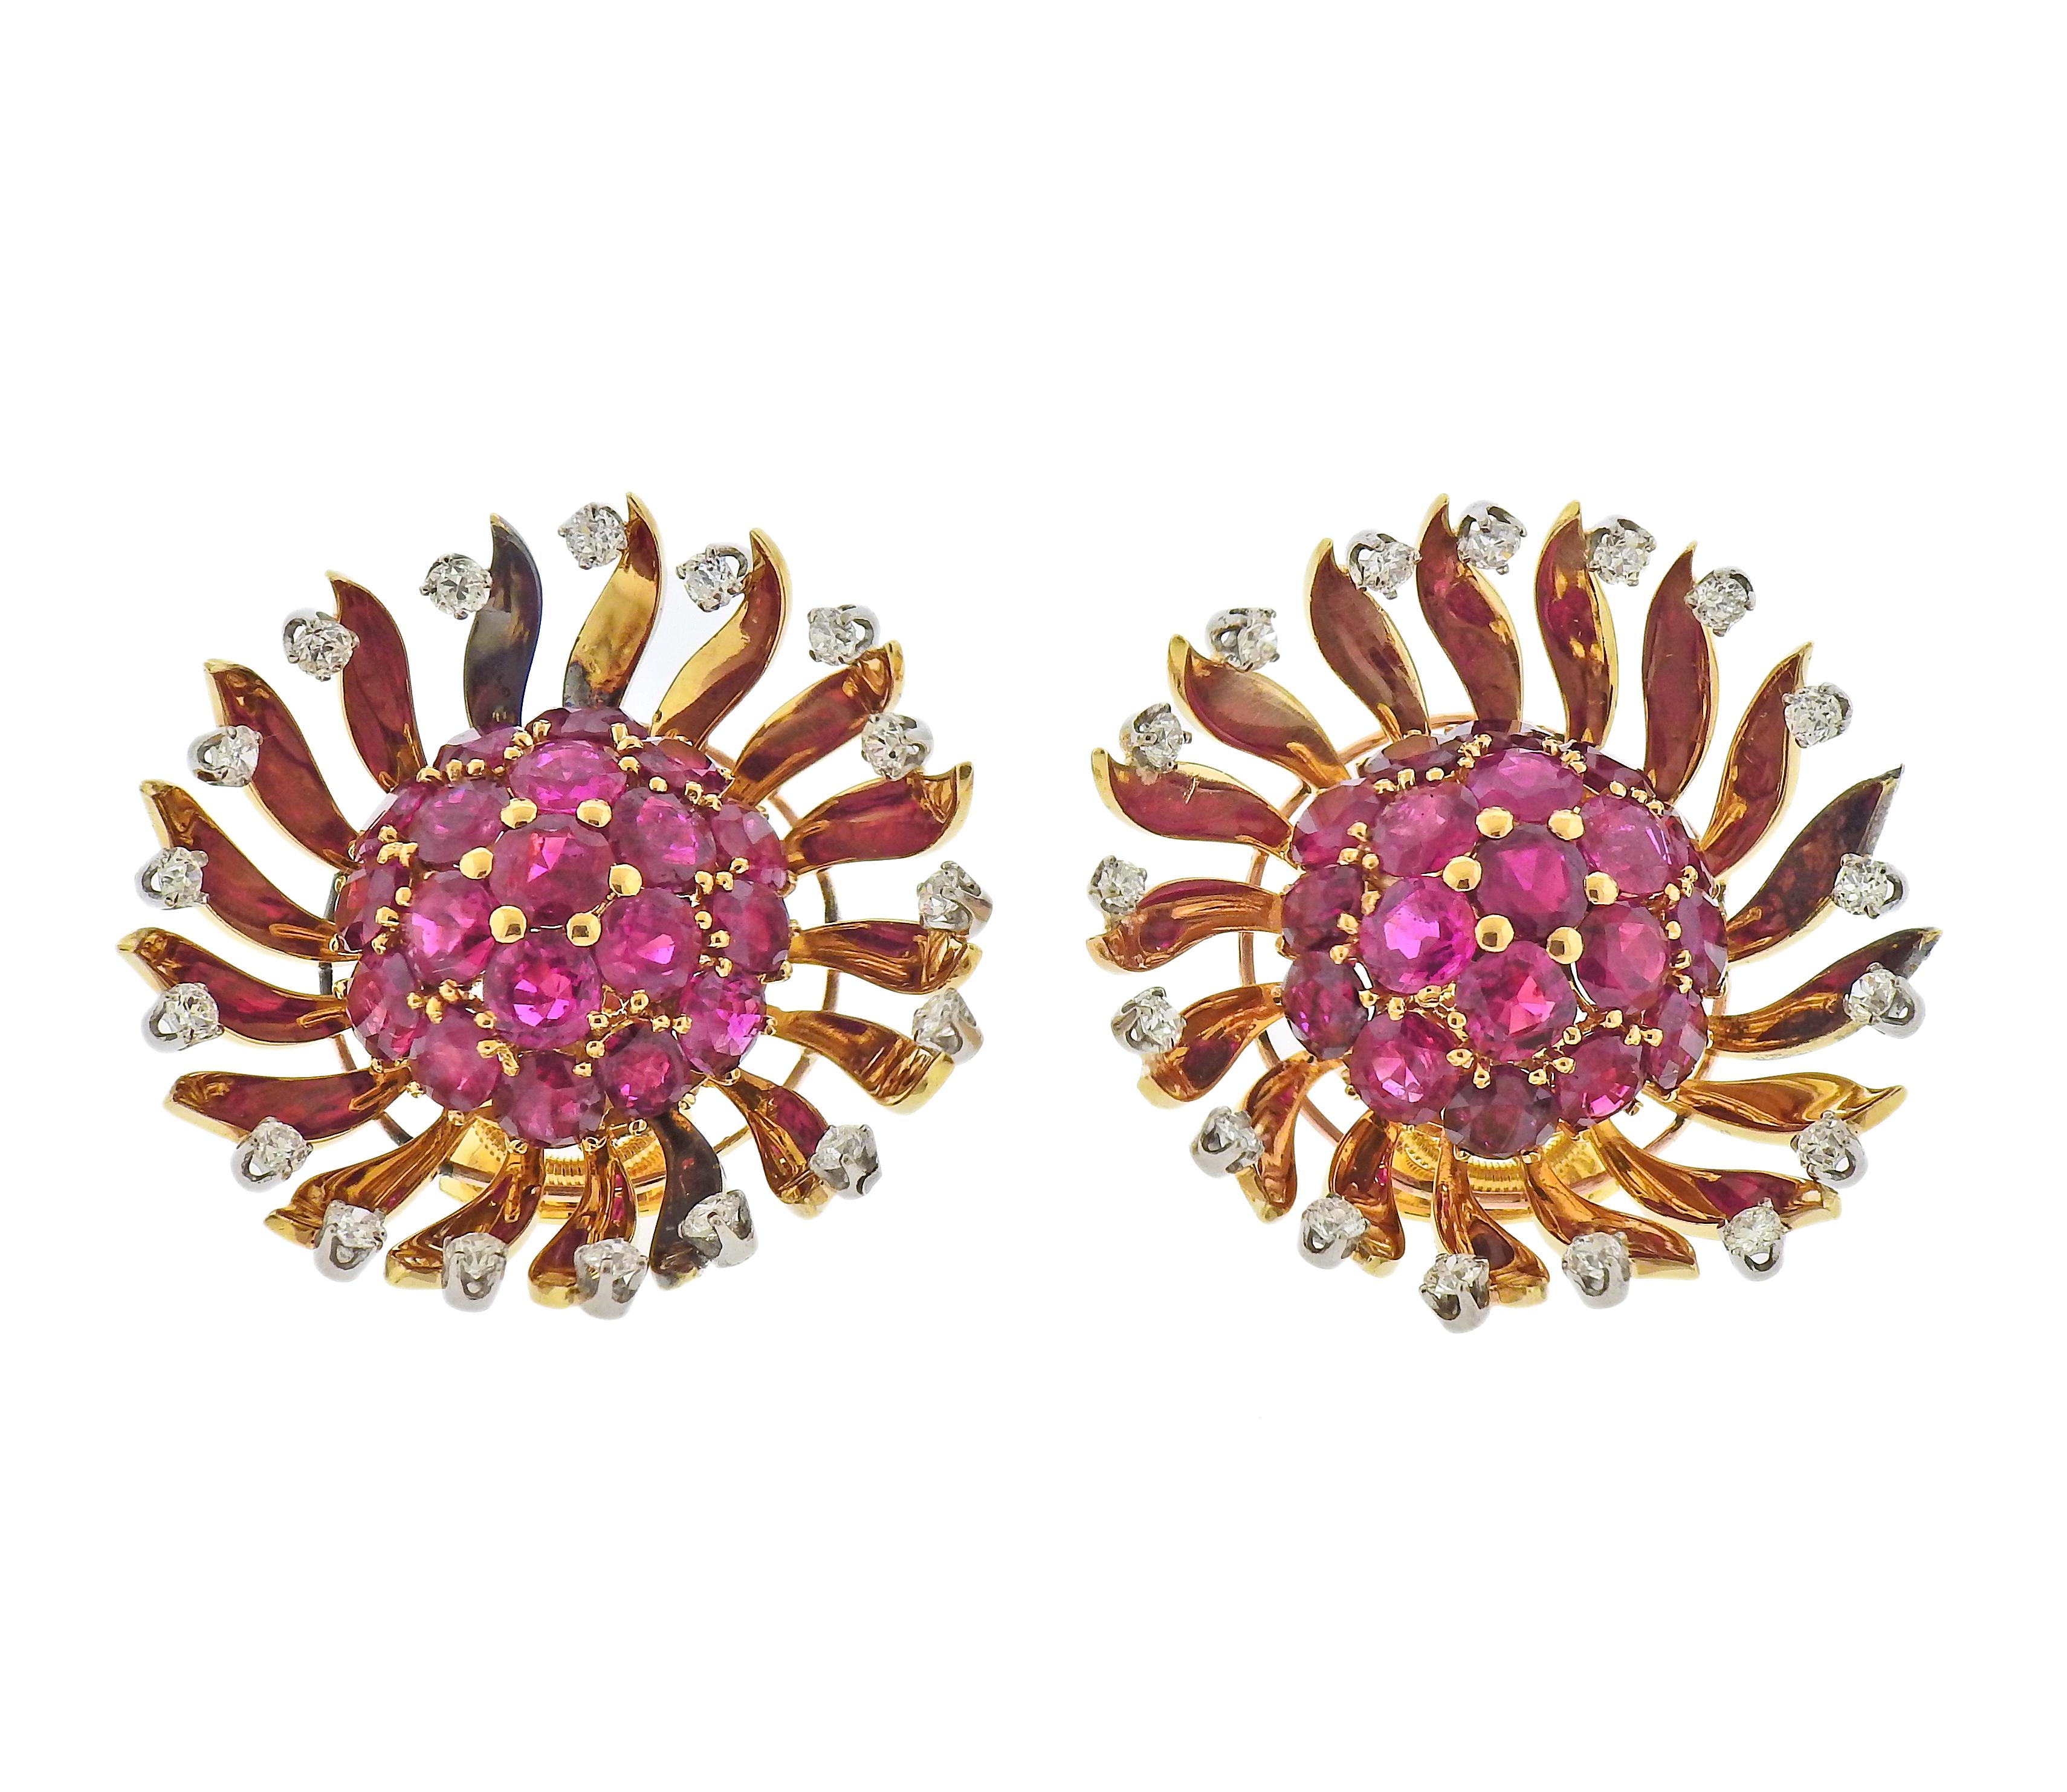 Pair of large 18k gold earrings with rubies and approx. 1.00ctw in diamonds. Earrings are 35mm in diameter. Weight - 35.2 grams. 